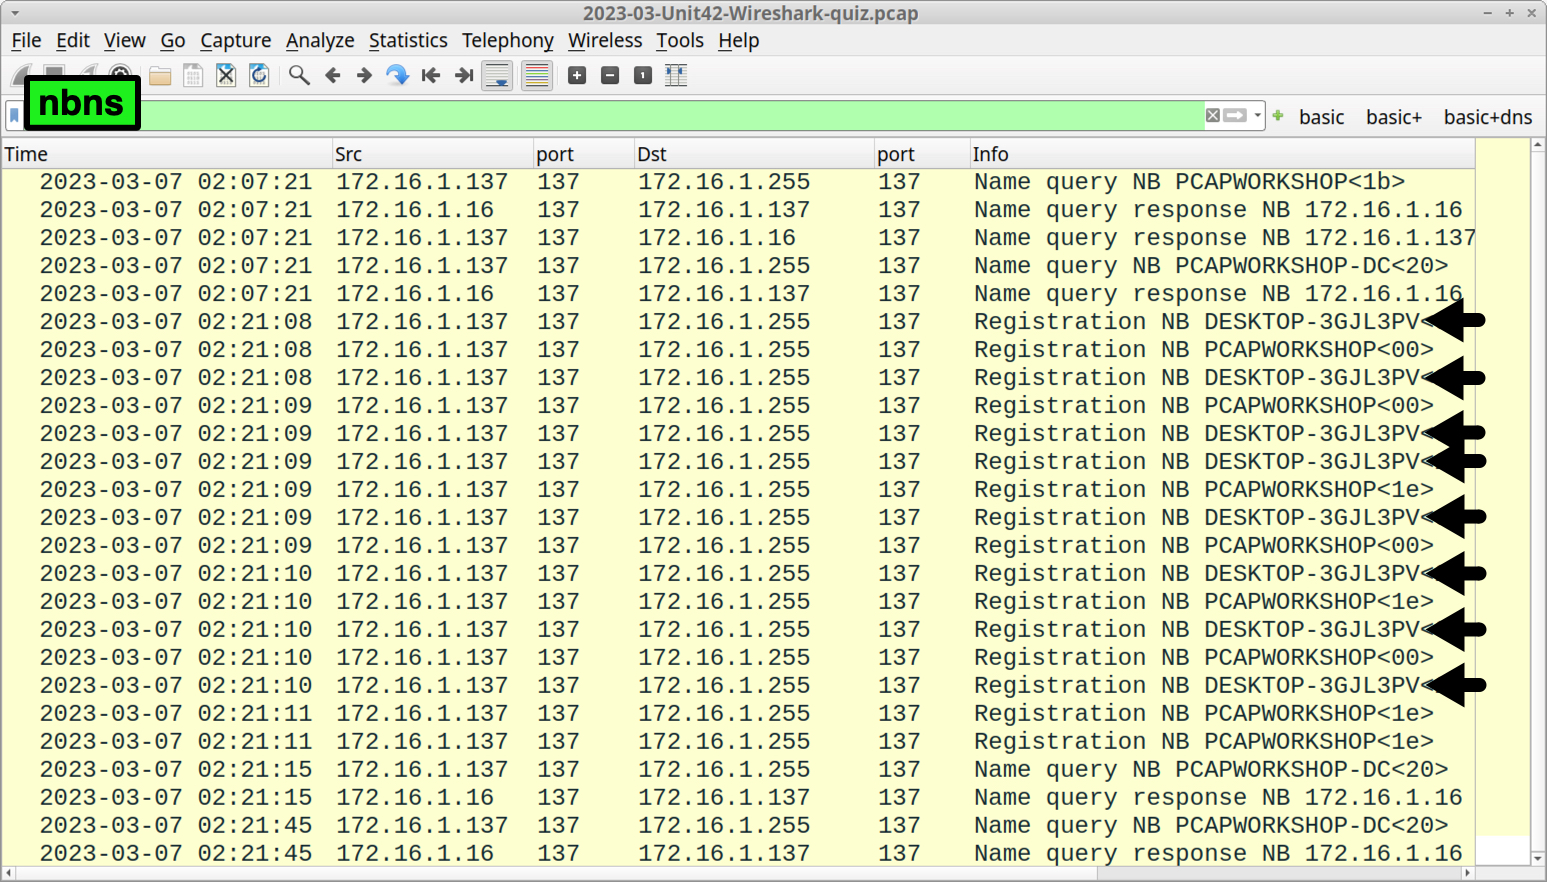 Image 2 is a screenshot of Wireshark showing how to find the Windows host name in the NBNS traffic, highlighted in green. 